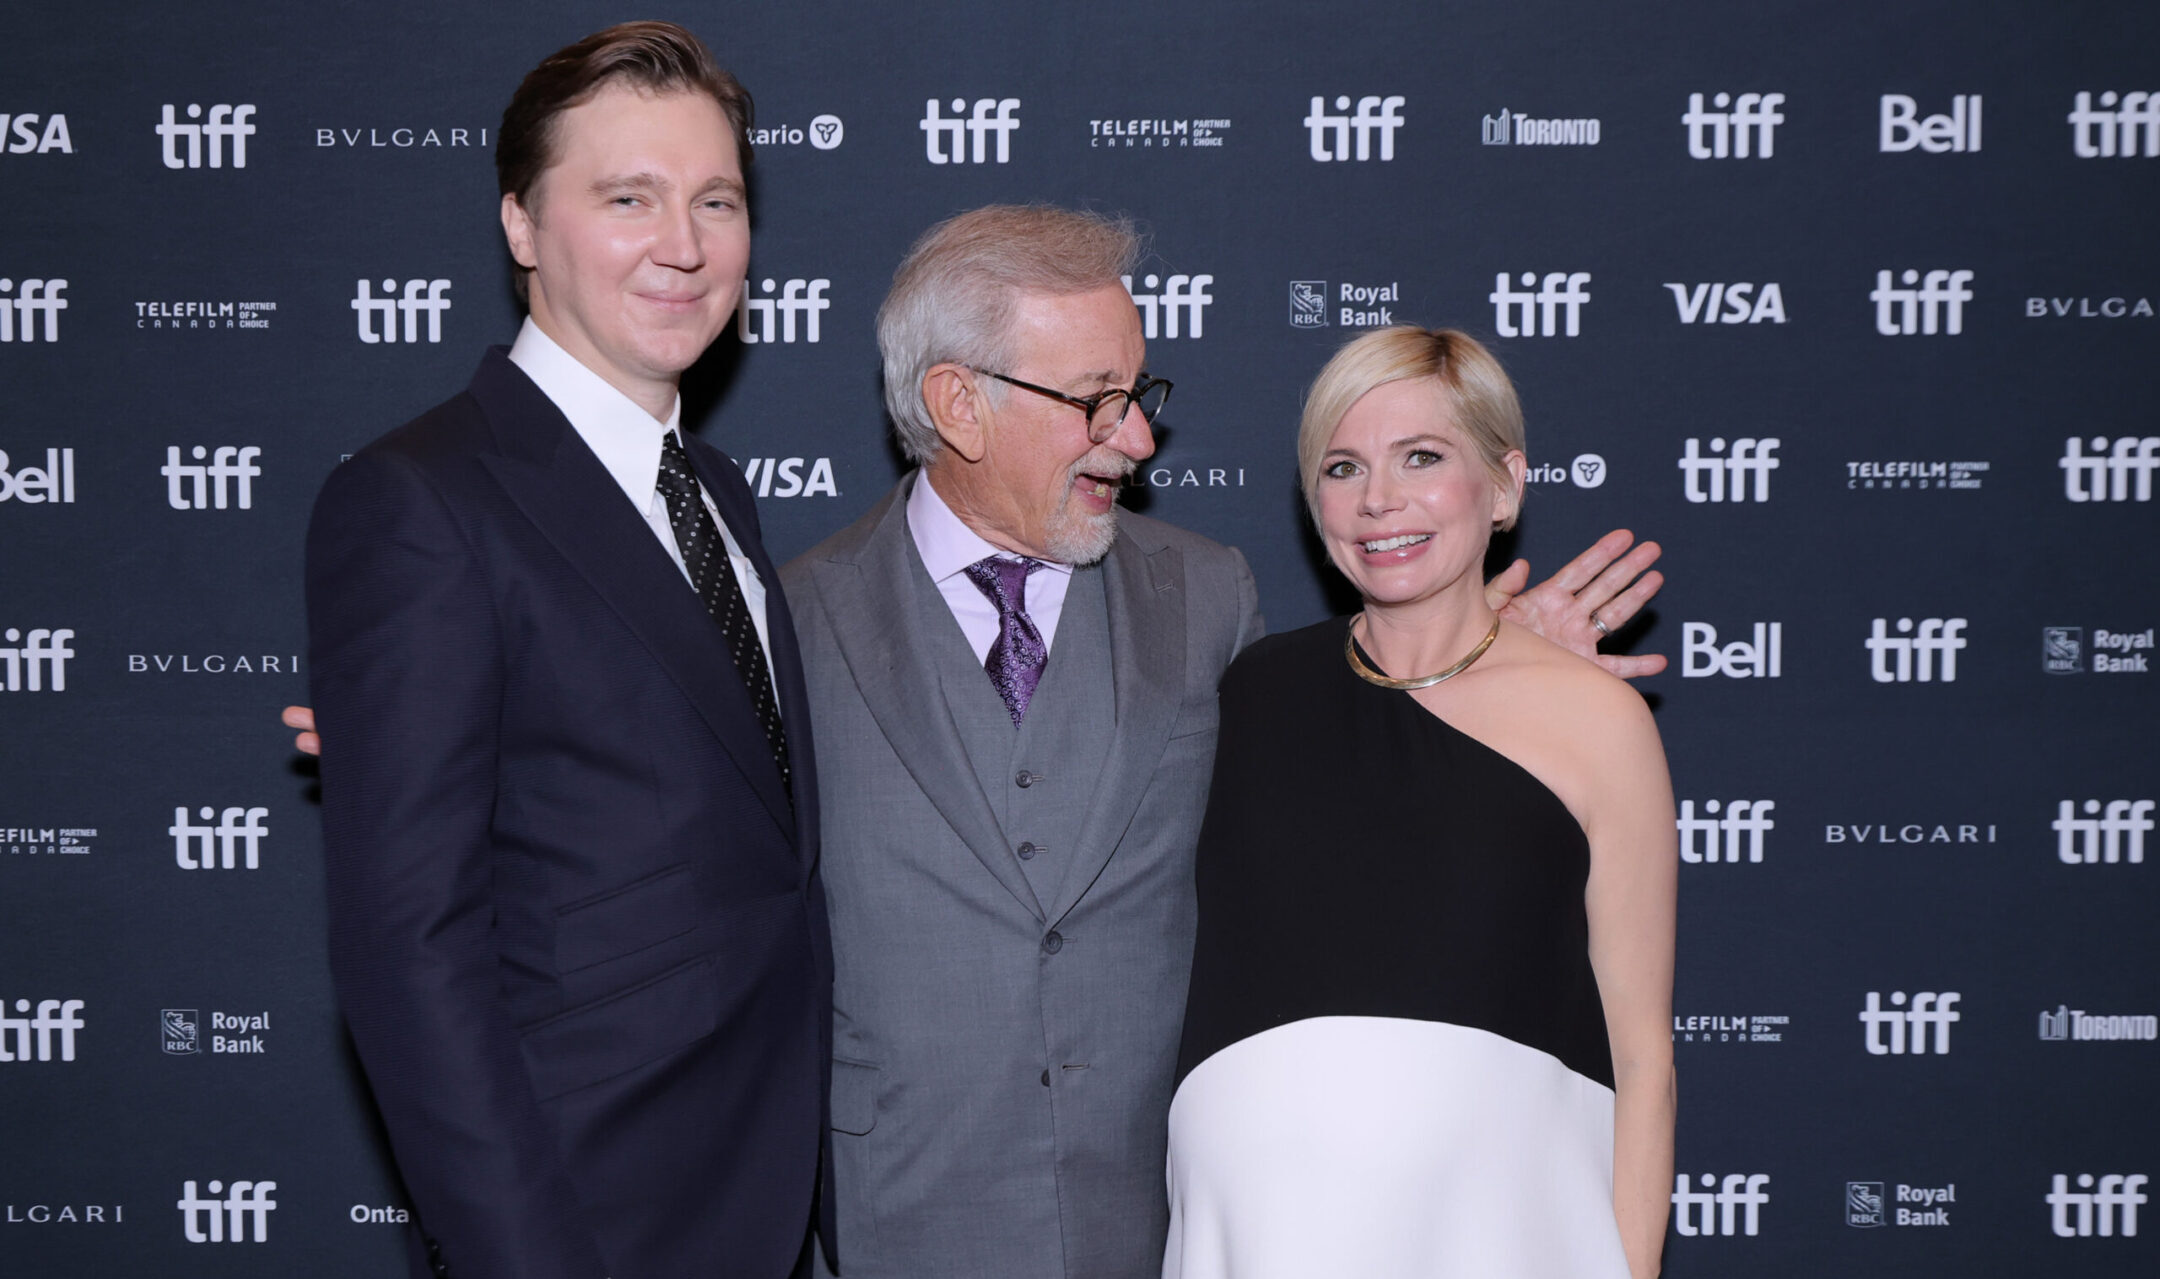 Paul Dano, Steven Spielberg and Michelle Williams attend “The Fabelmans” premiere during the 2022 Toronto International Film Festival, Sept. 10, 2022. (Michael Loccisano/Getty Images)